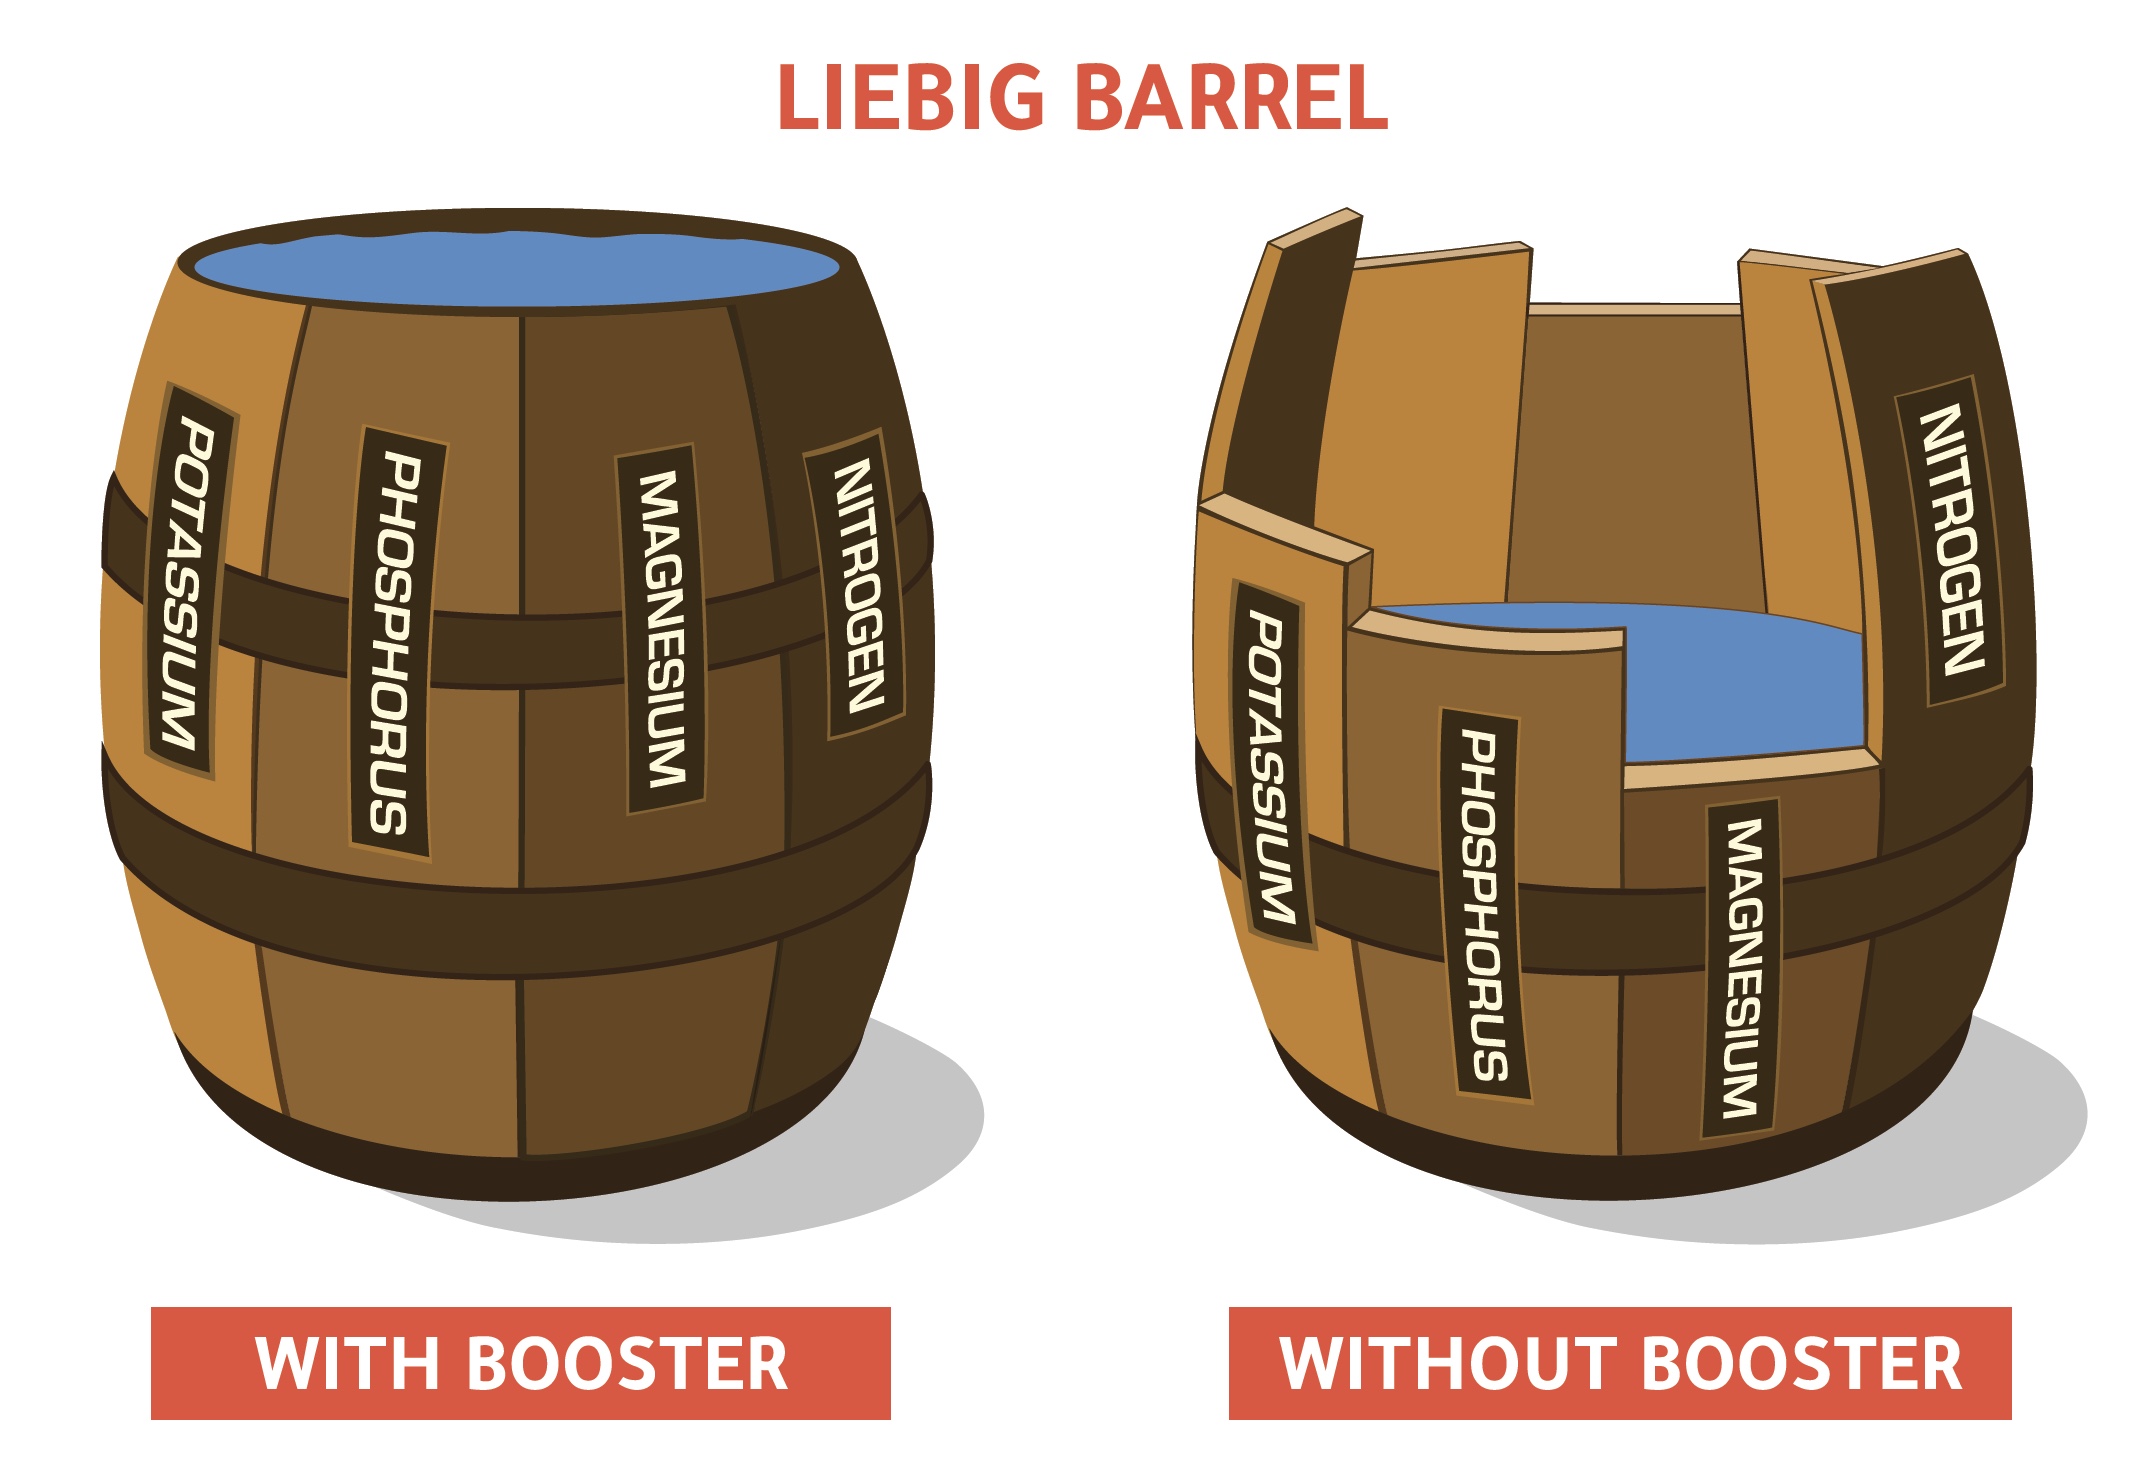 Libig barel diagram with and without Booster PK+